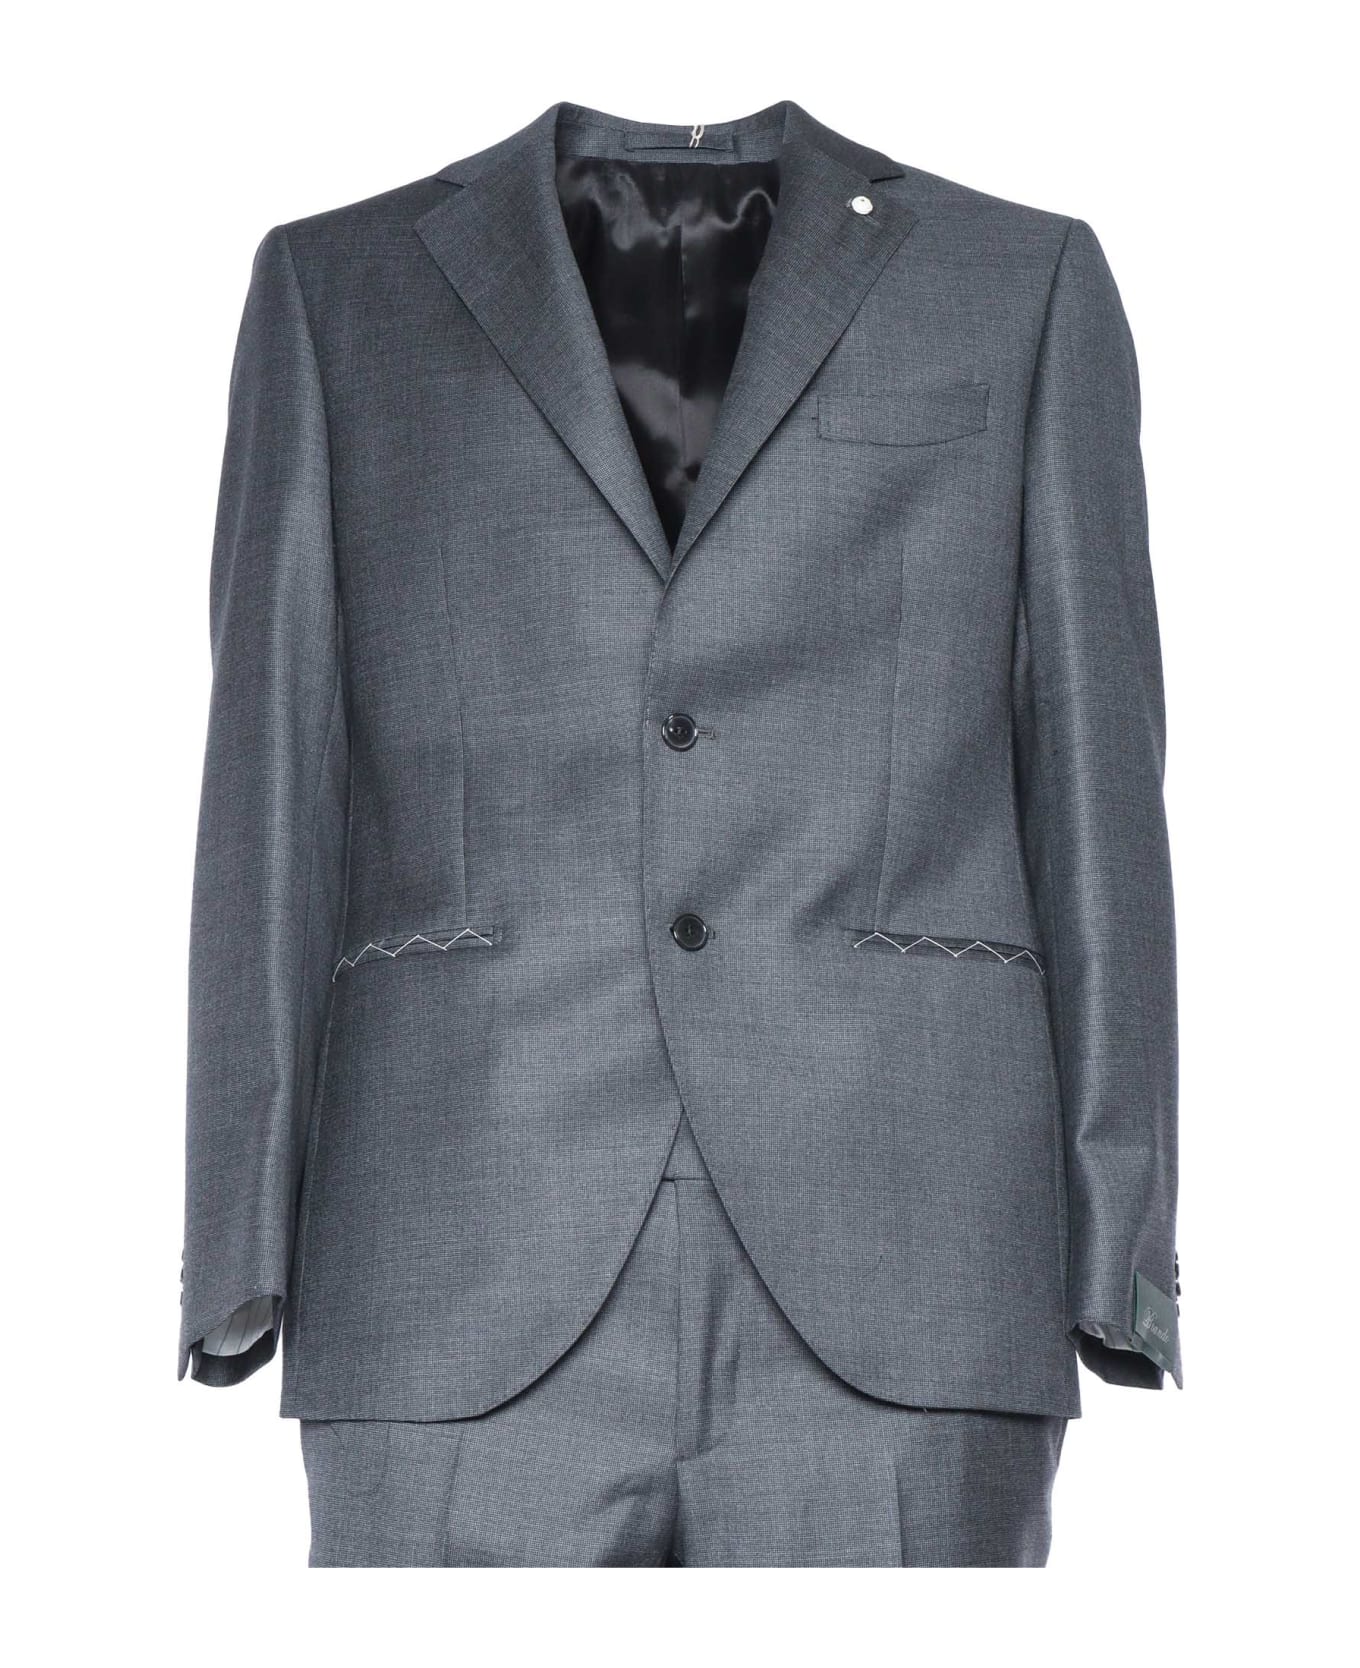 L.B.M. 1911 Single-breasted Suit - GREY